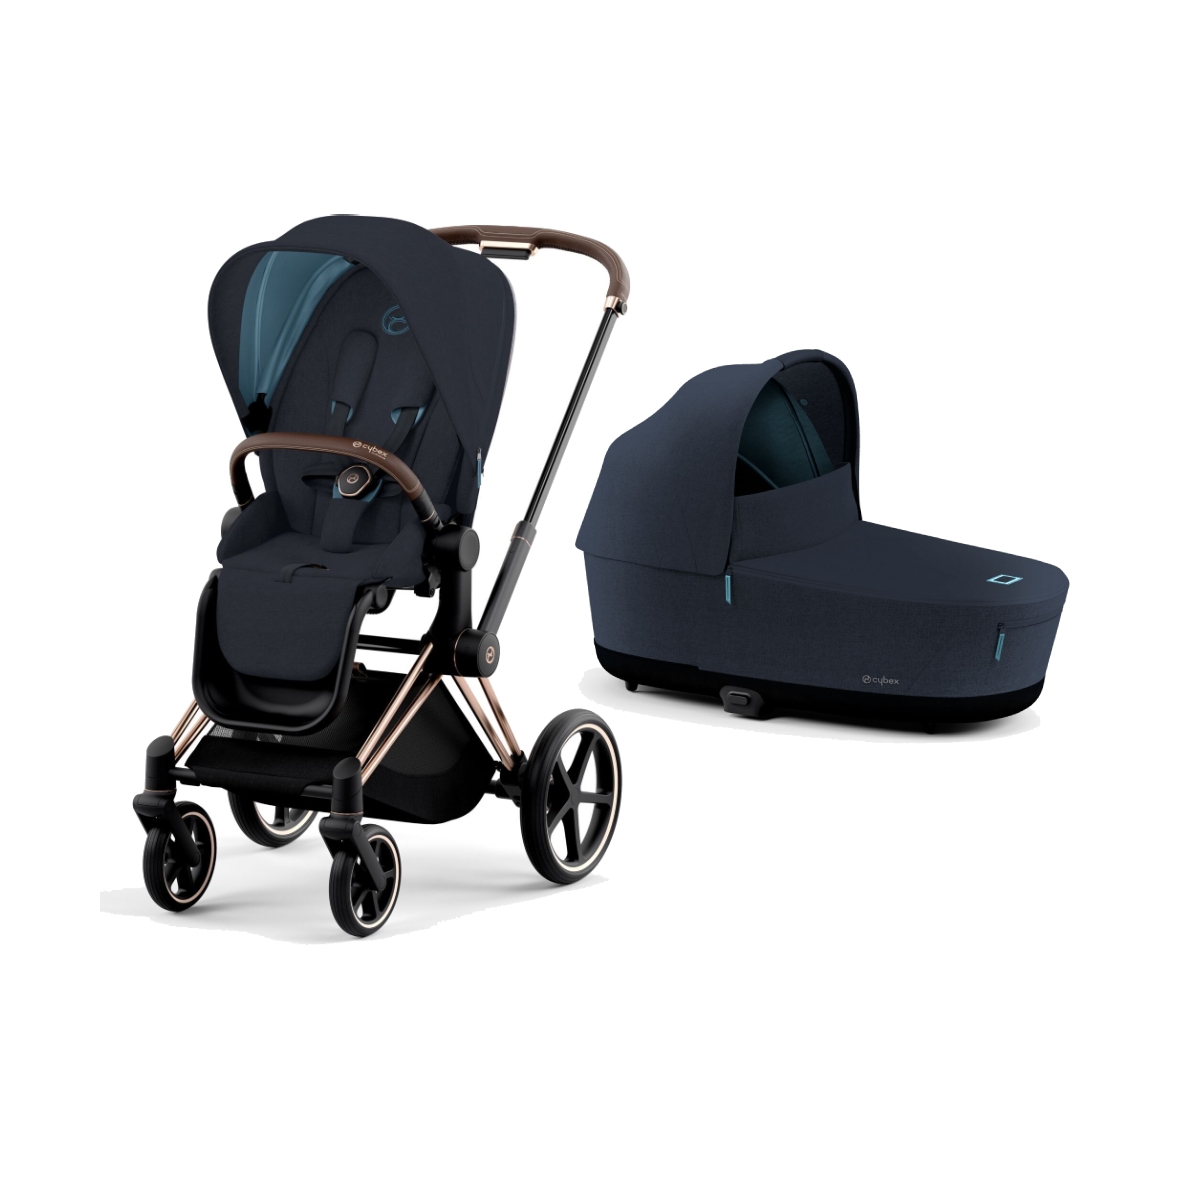 Cybex Priam Rose Gold Pushchair with Lux Carry Cot